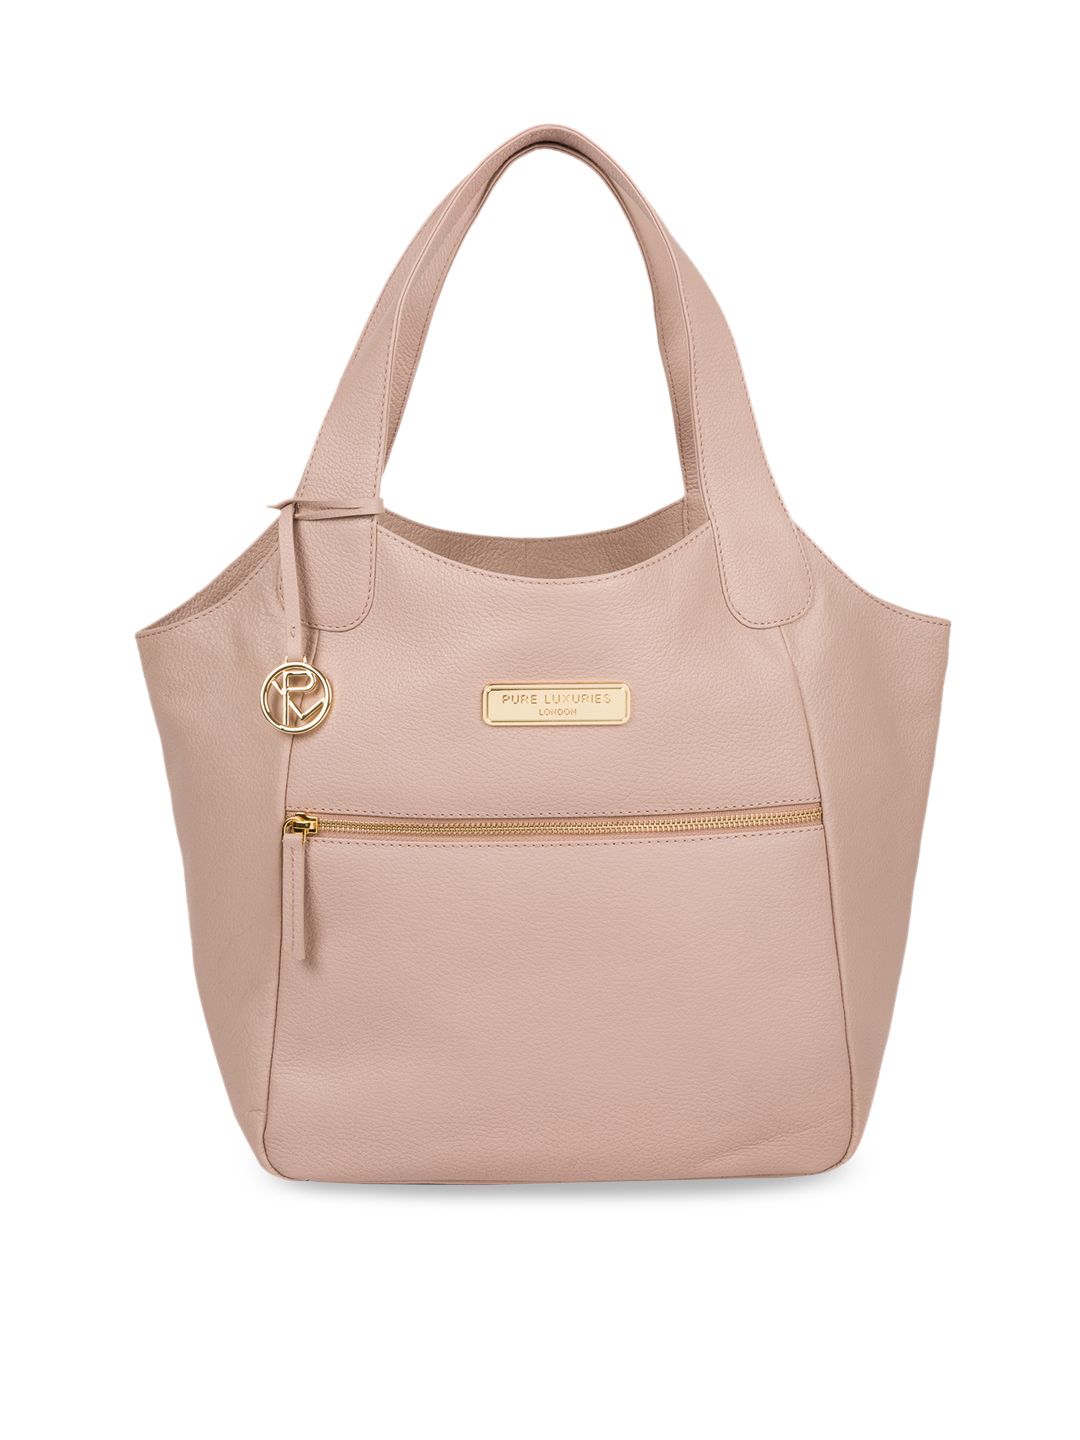 PURE LUXURIES LONDON Women Pink Solid Genuine Leather Roxanne Tote Bag Price in India